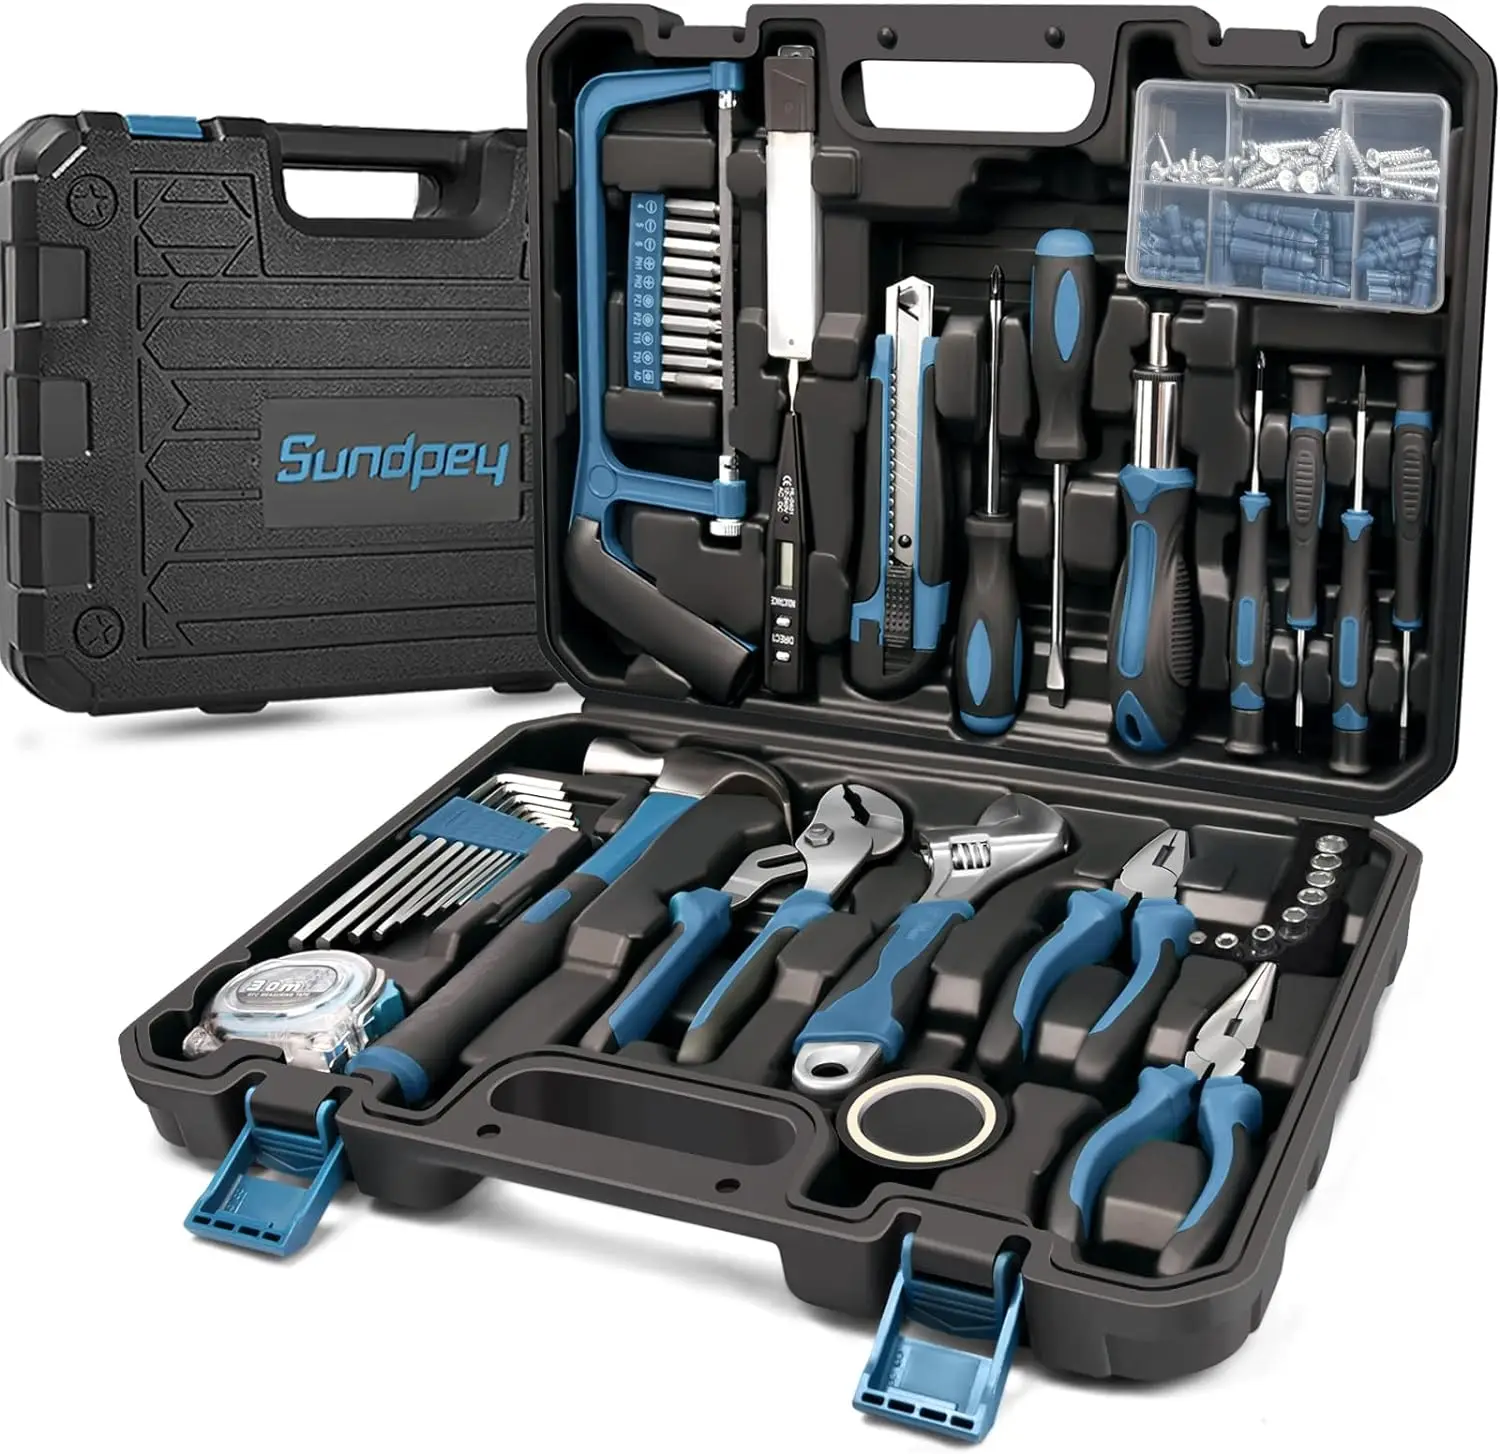 sundpey-home-tool-kit-148-pcs-household-basic-complete-hand-repair-portable-tool-set-with-case-ratcheting-screwdriver